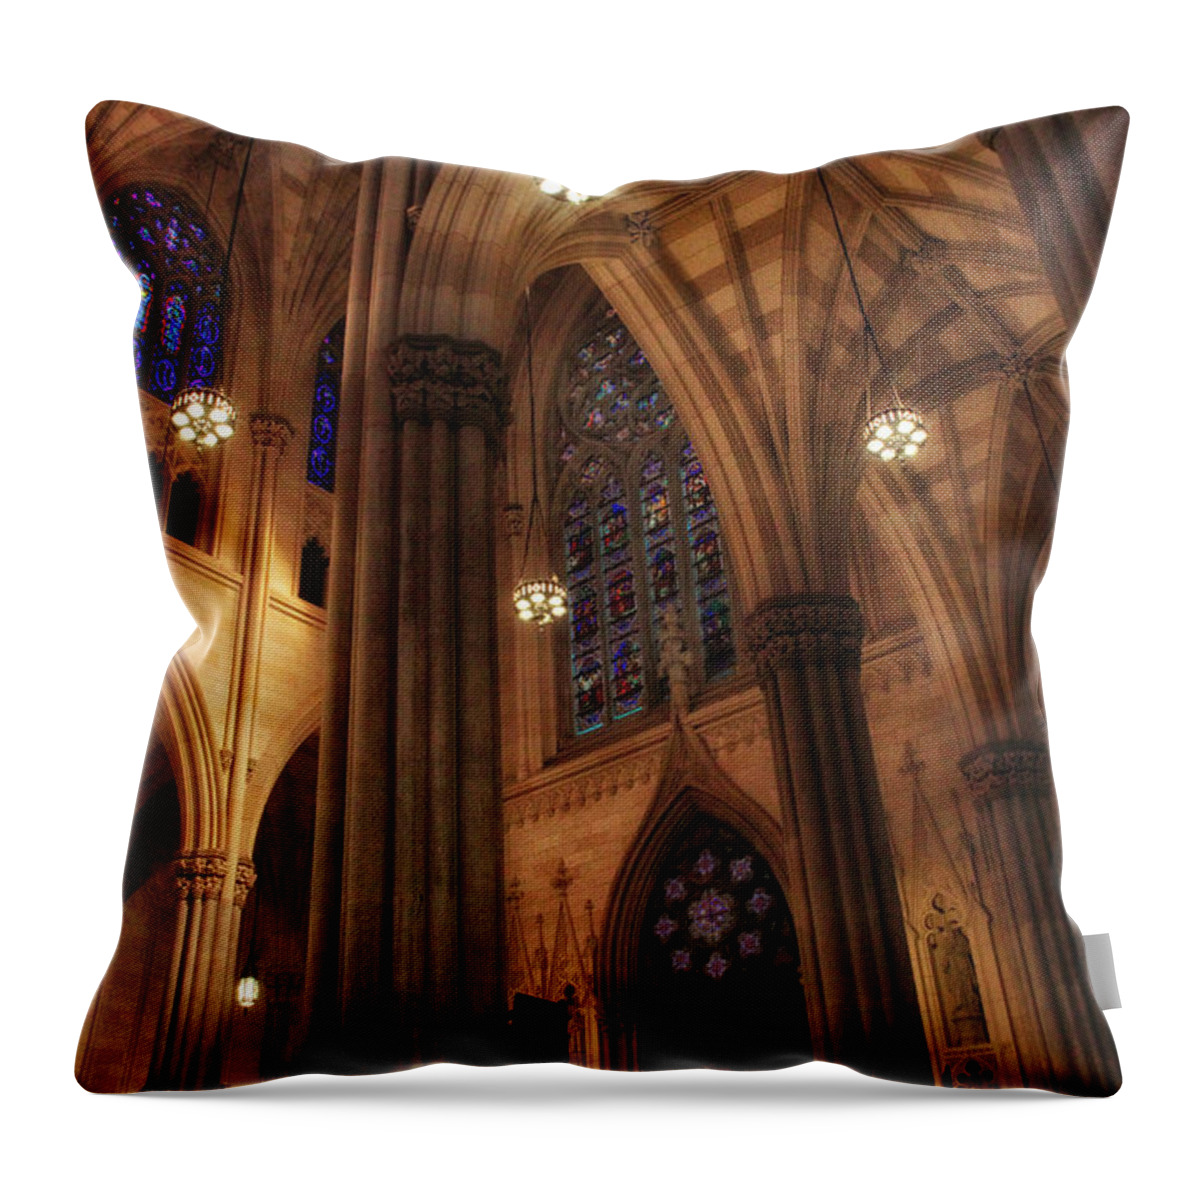 Gothic Arches Throw Pillow by Jessica Jenney - 18 x 18 - Jessica